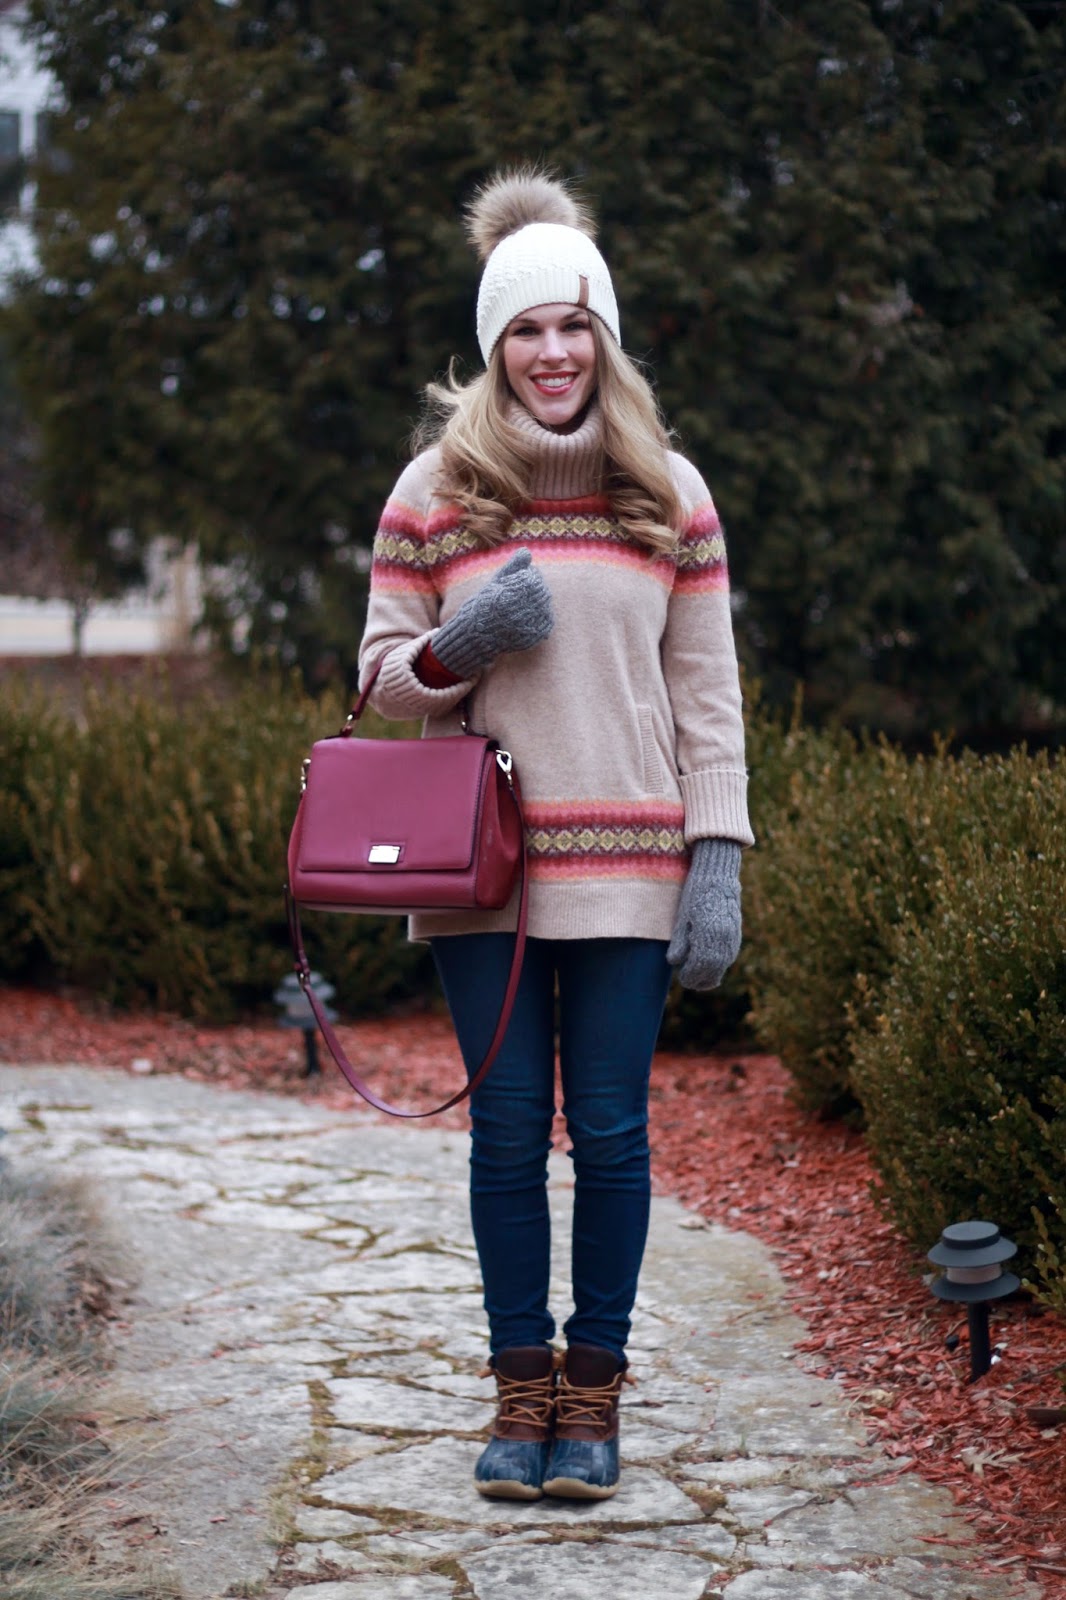 How to Stay Warm and Look Cute in Winter